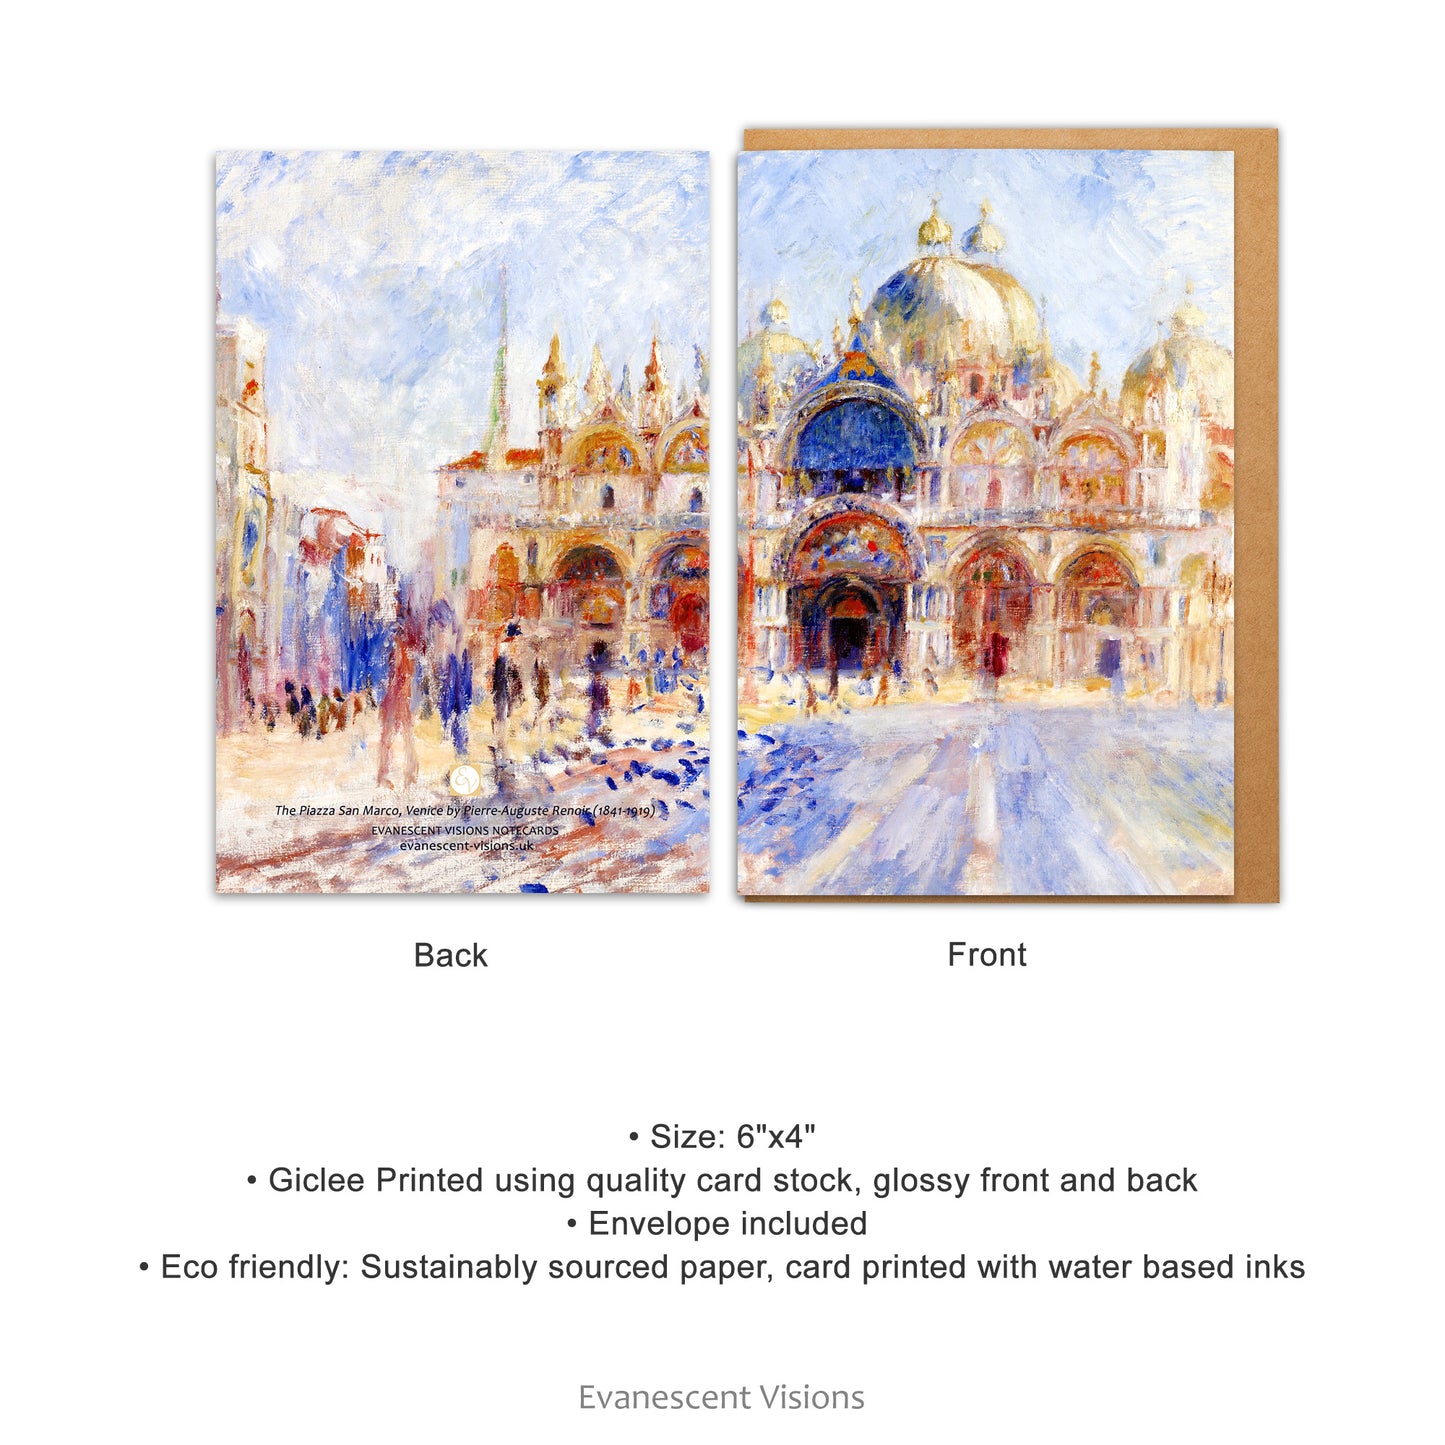 front and back views and product details of the Renoir The Piazza San Marco Venice Notecard